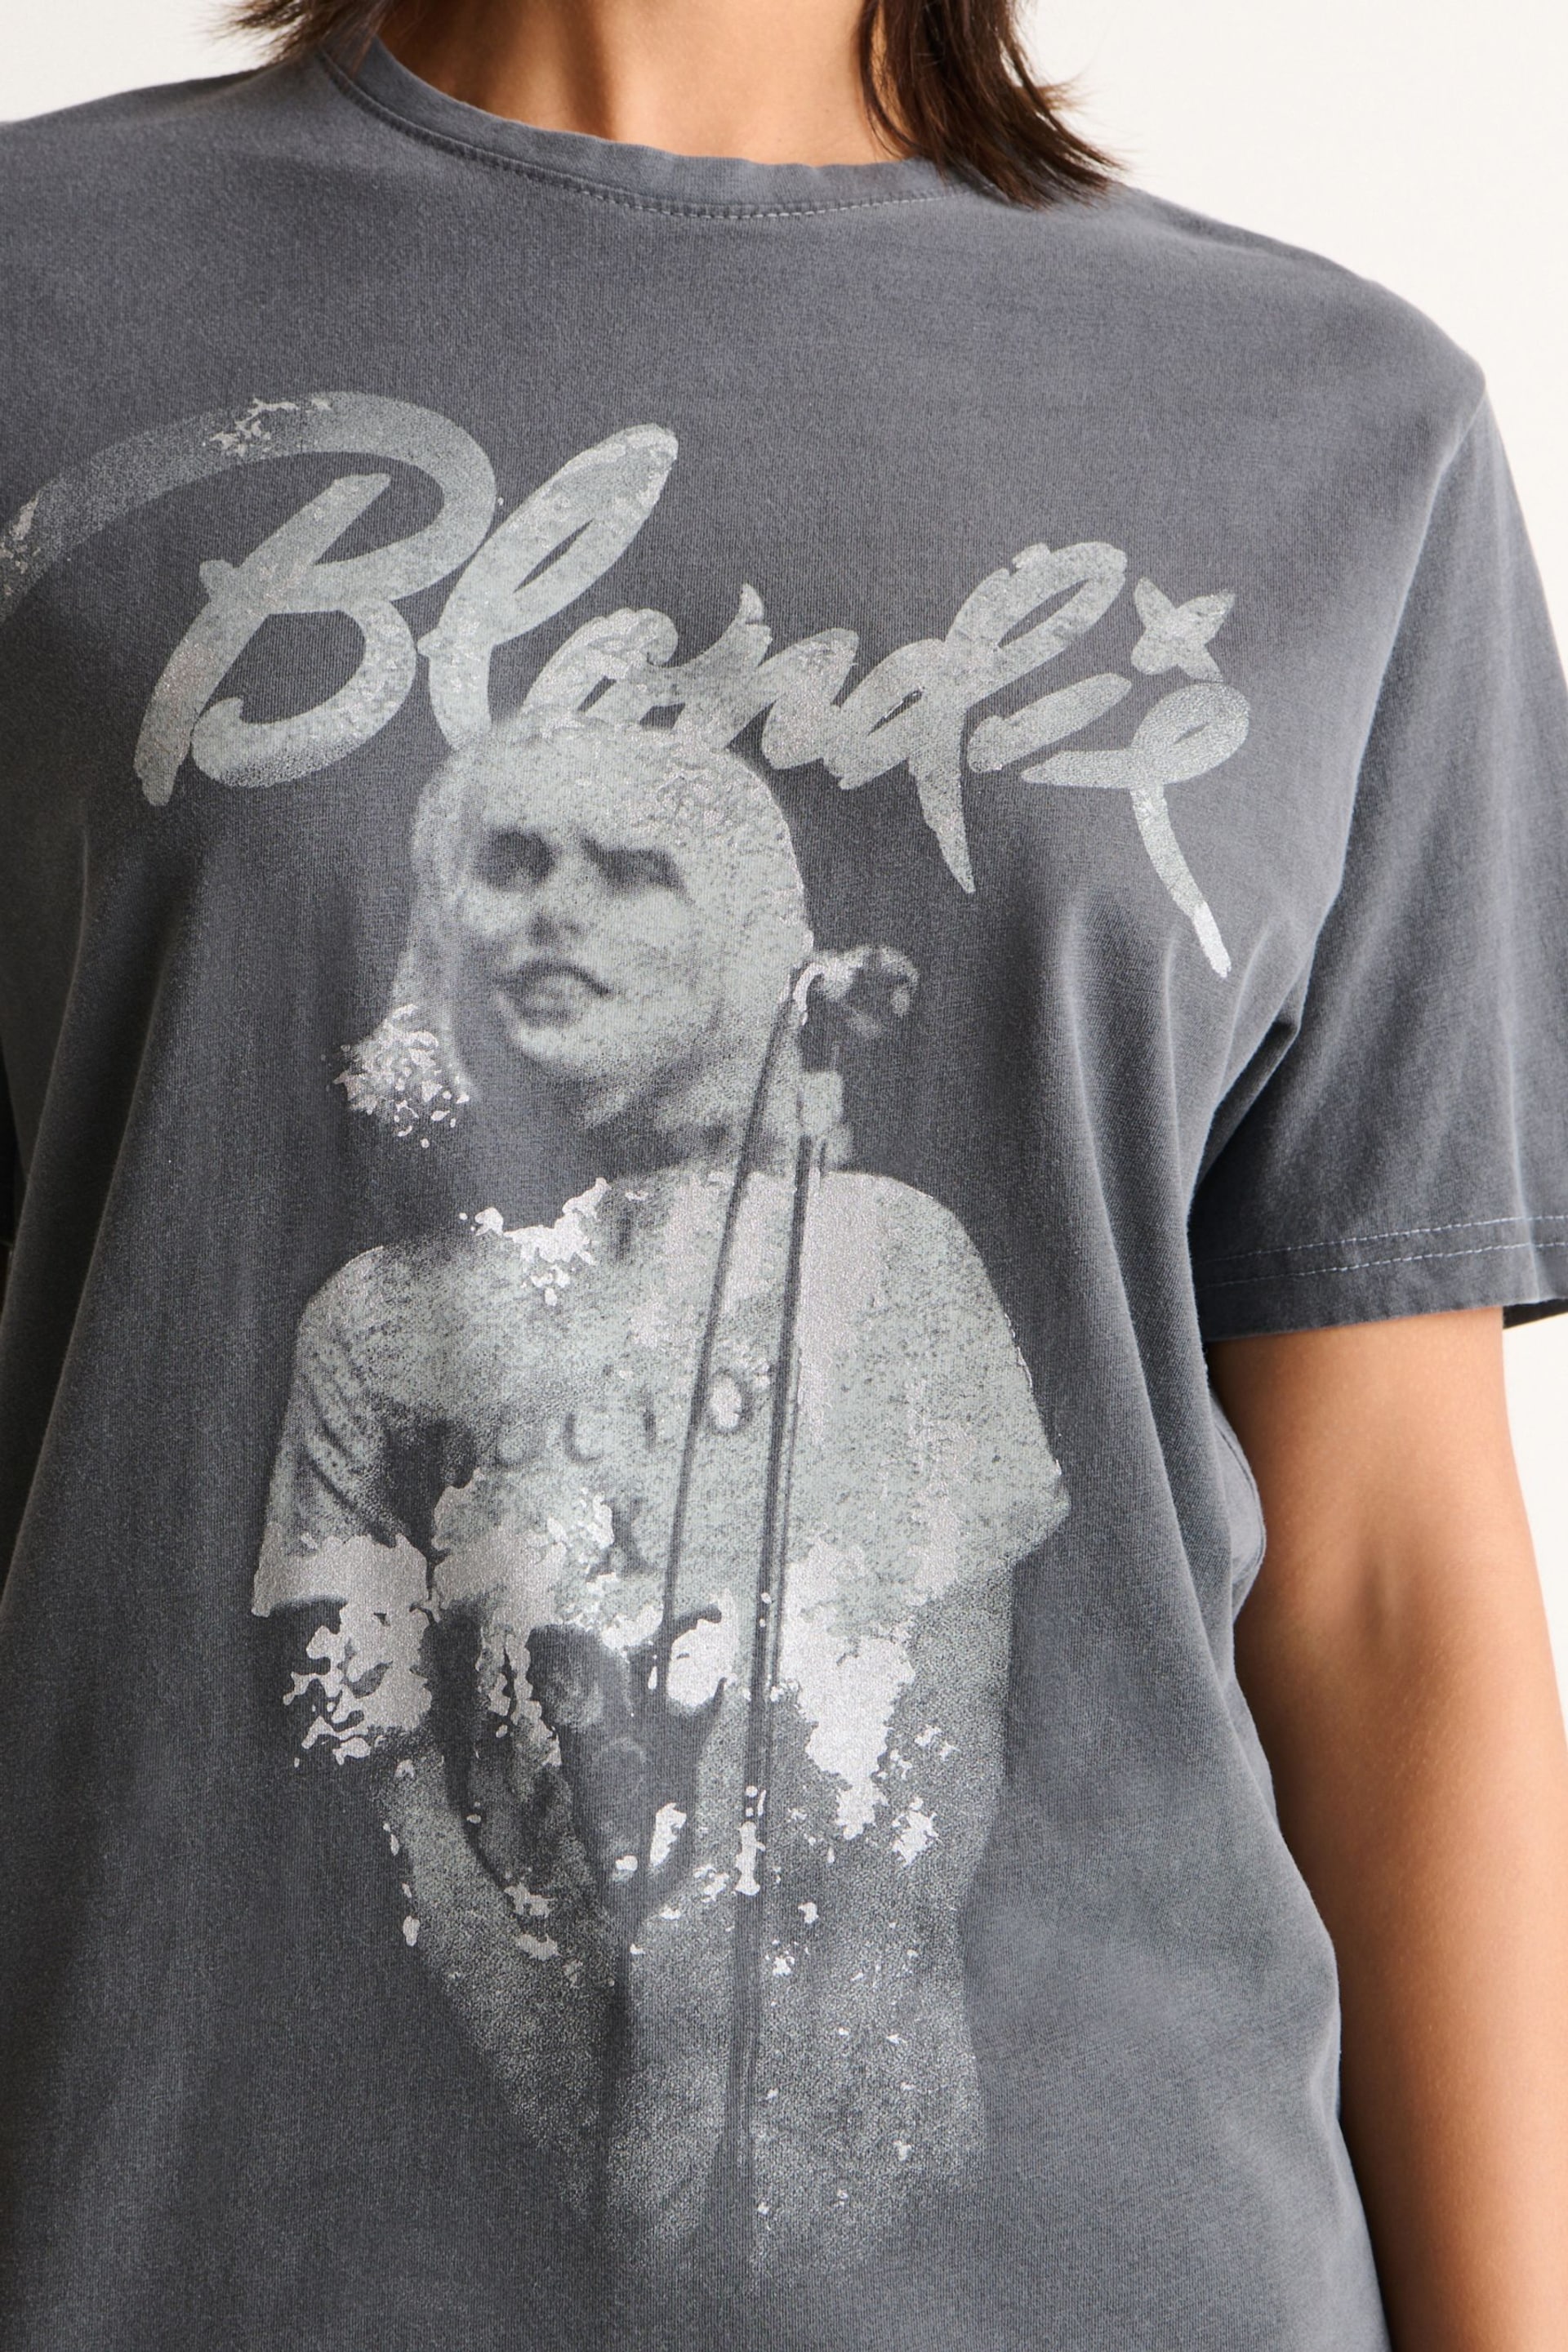 Charcoal Grey License Blondie Short Sleeve Graphic Band T-Shirt - Image 5 of 7